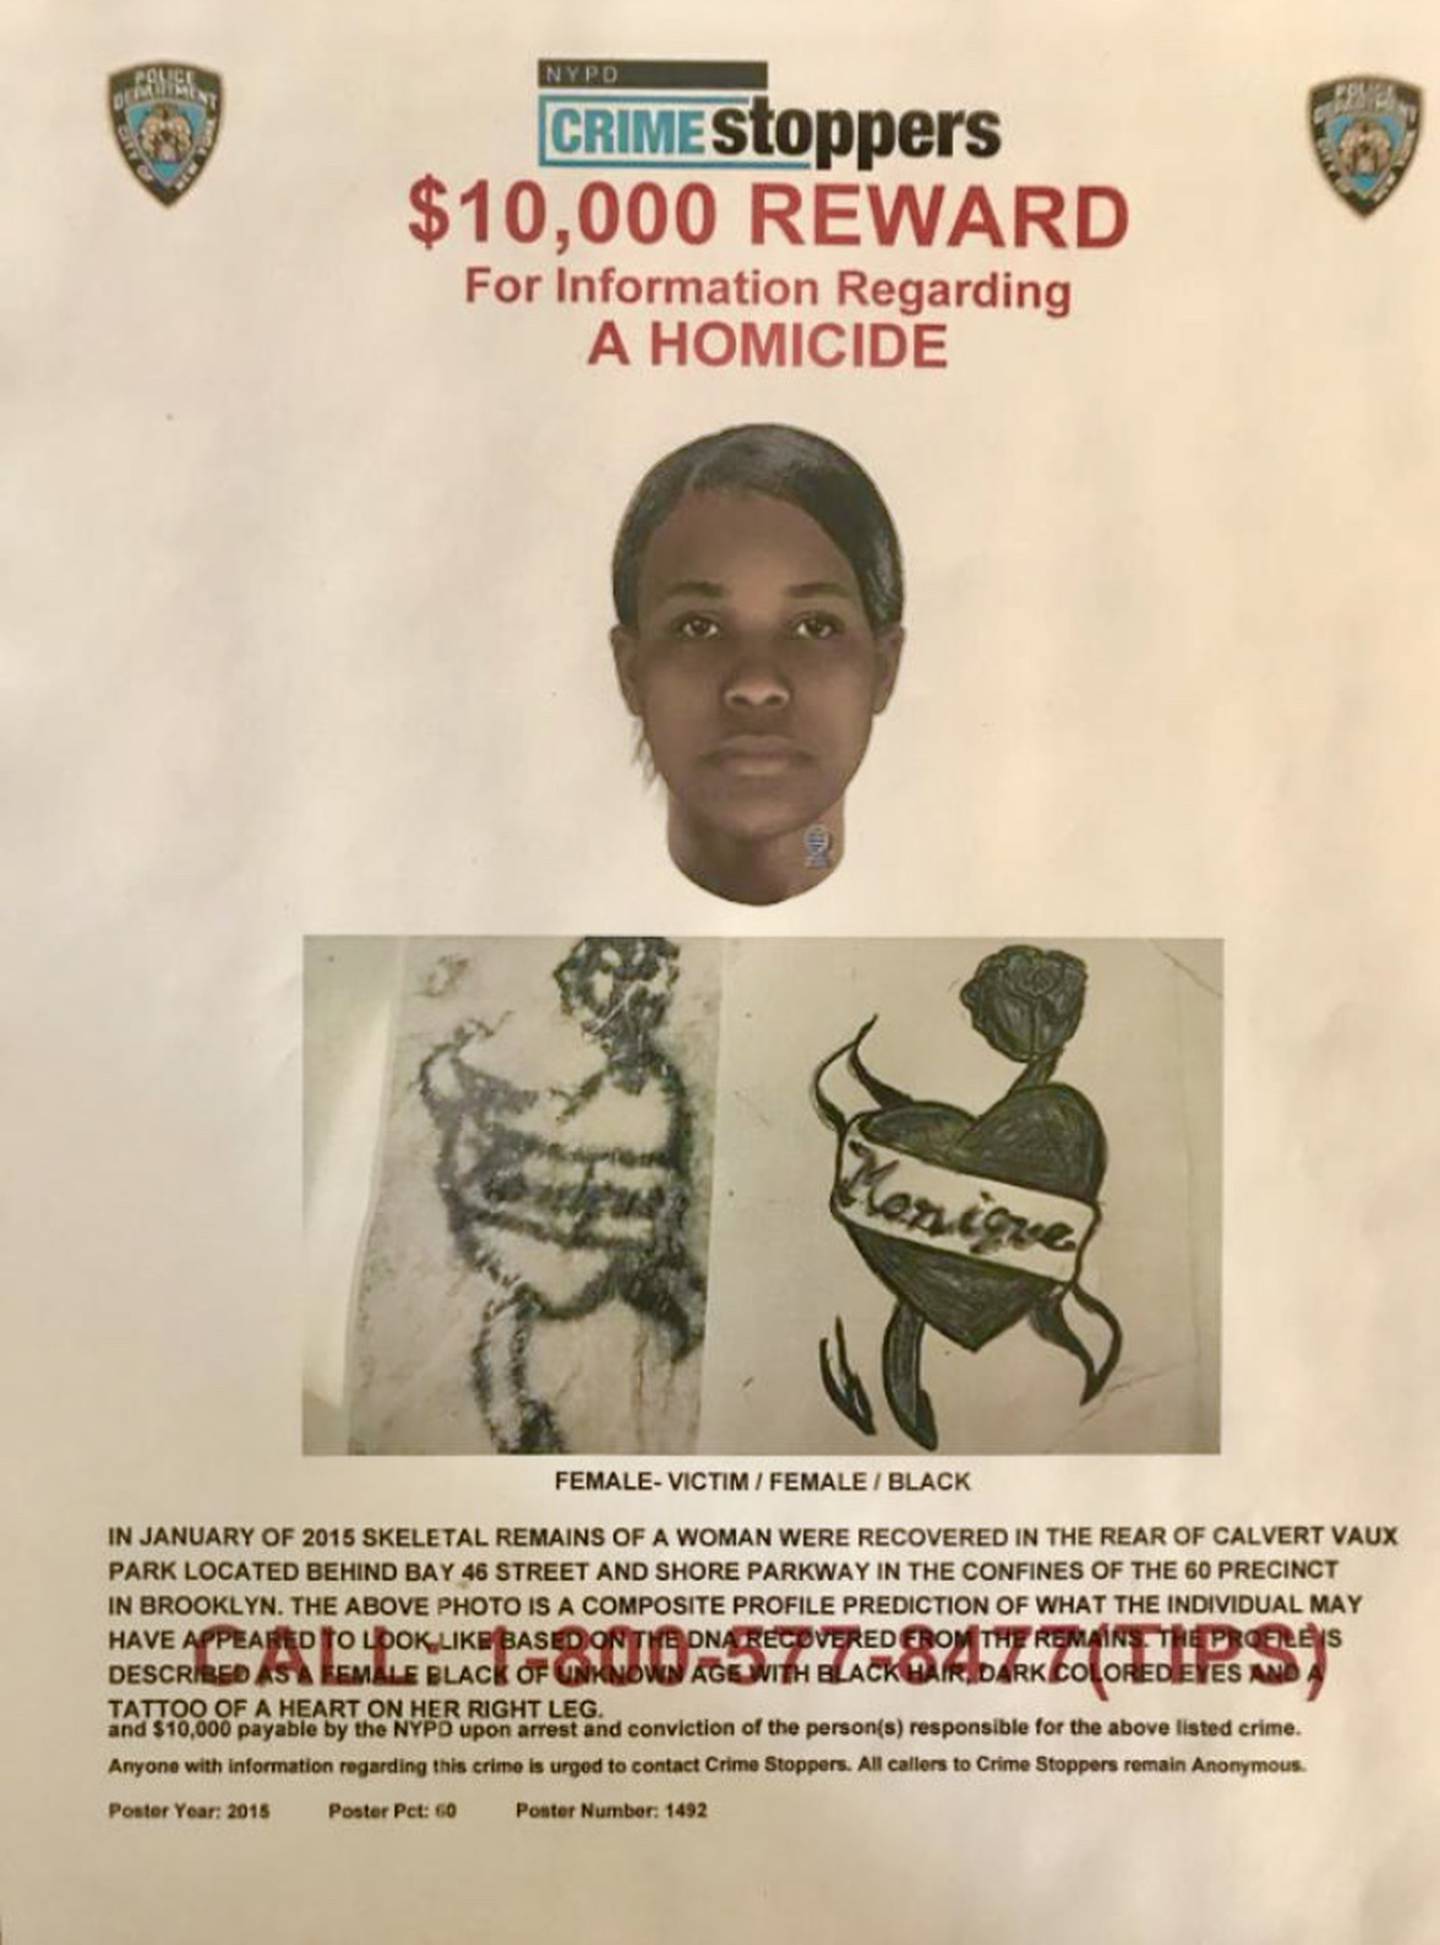 Poster released by the NYPD for information about a woman whose severed limbs was found in Calvert Vaux Park near the Coney Island inlet, in January of 2015. The only recognizable feature in the human remains is a tattoo that appears to say "Monique."